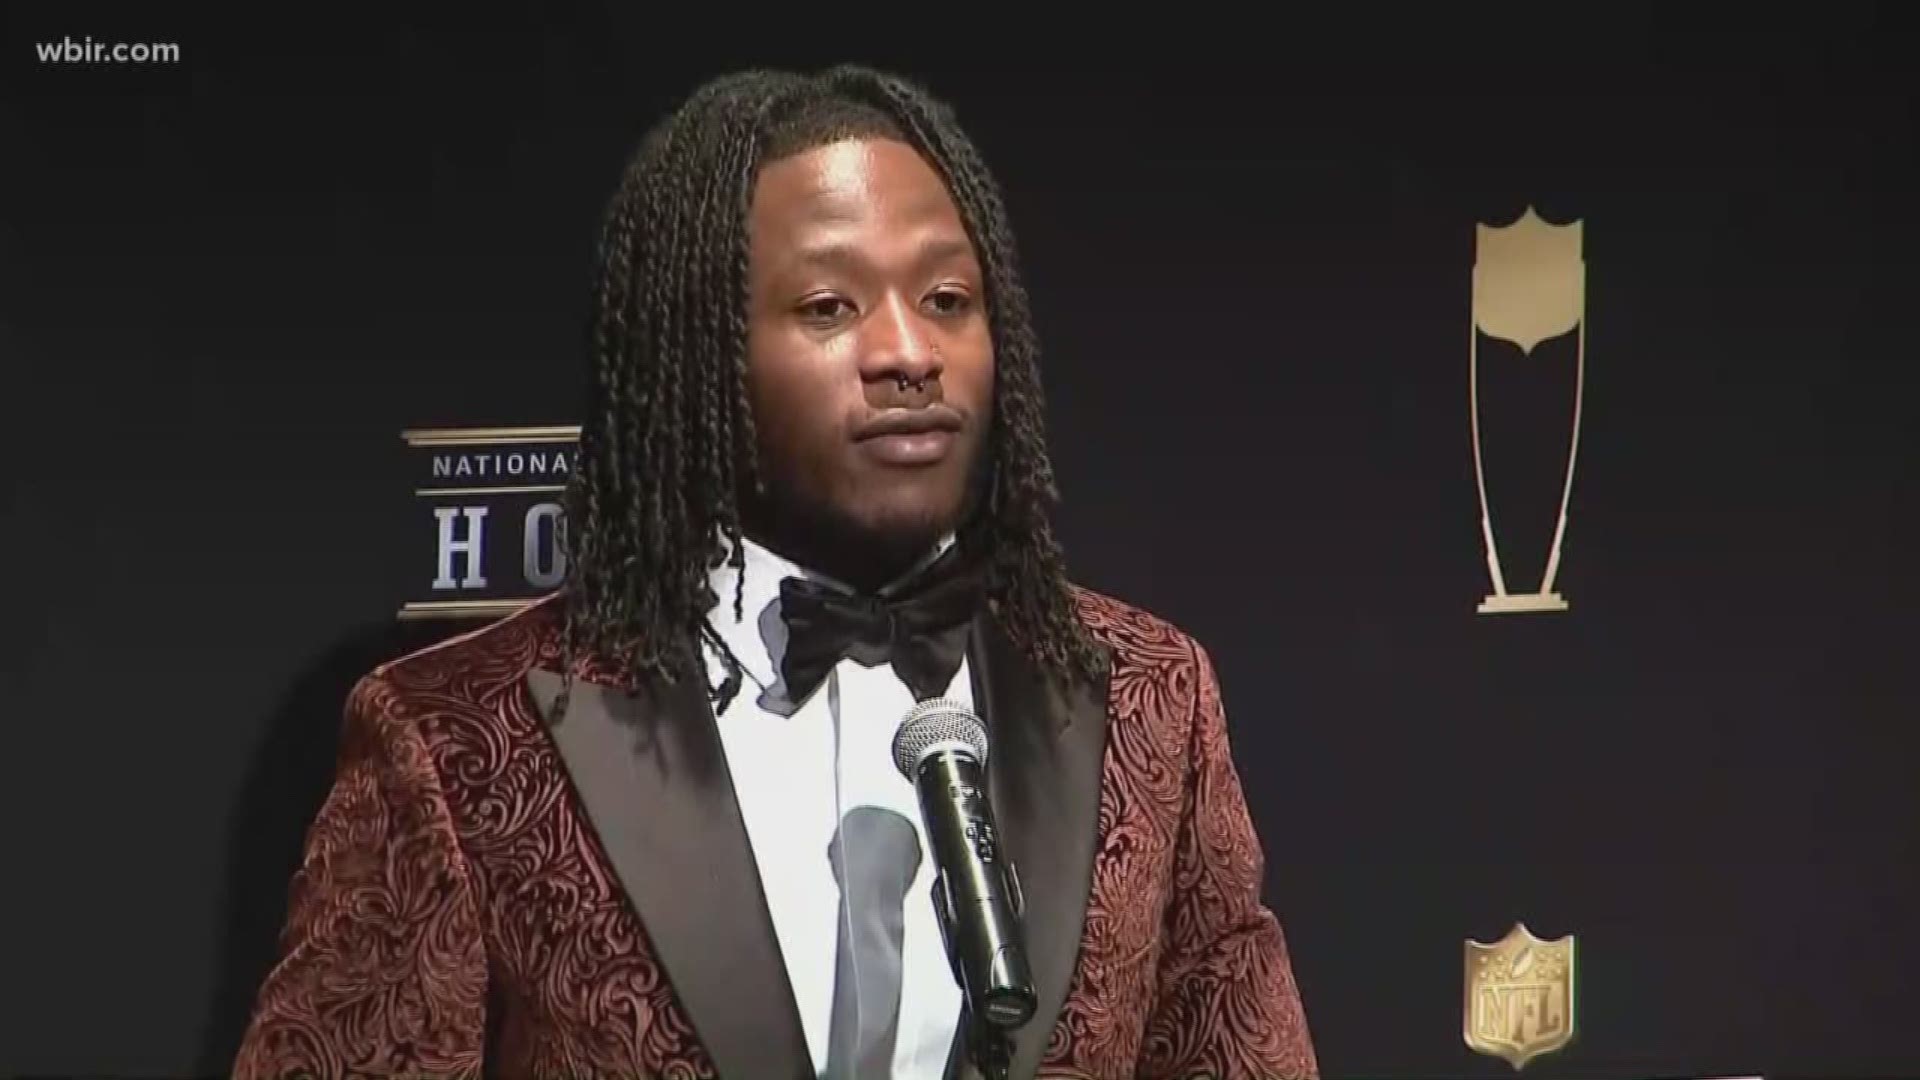 Former Vol Alvin Kamara capped a historic season with the Offensive Rookie of the Year award, but some of the discussion in his press conference surrounded his lack of touches at Tennessee.